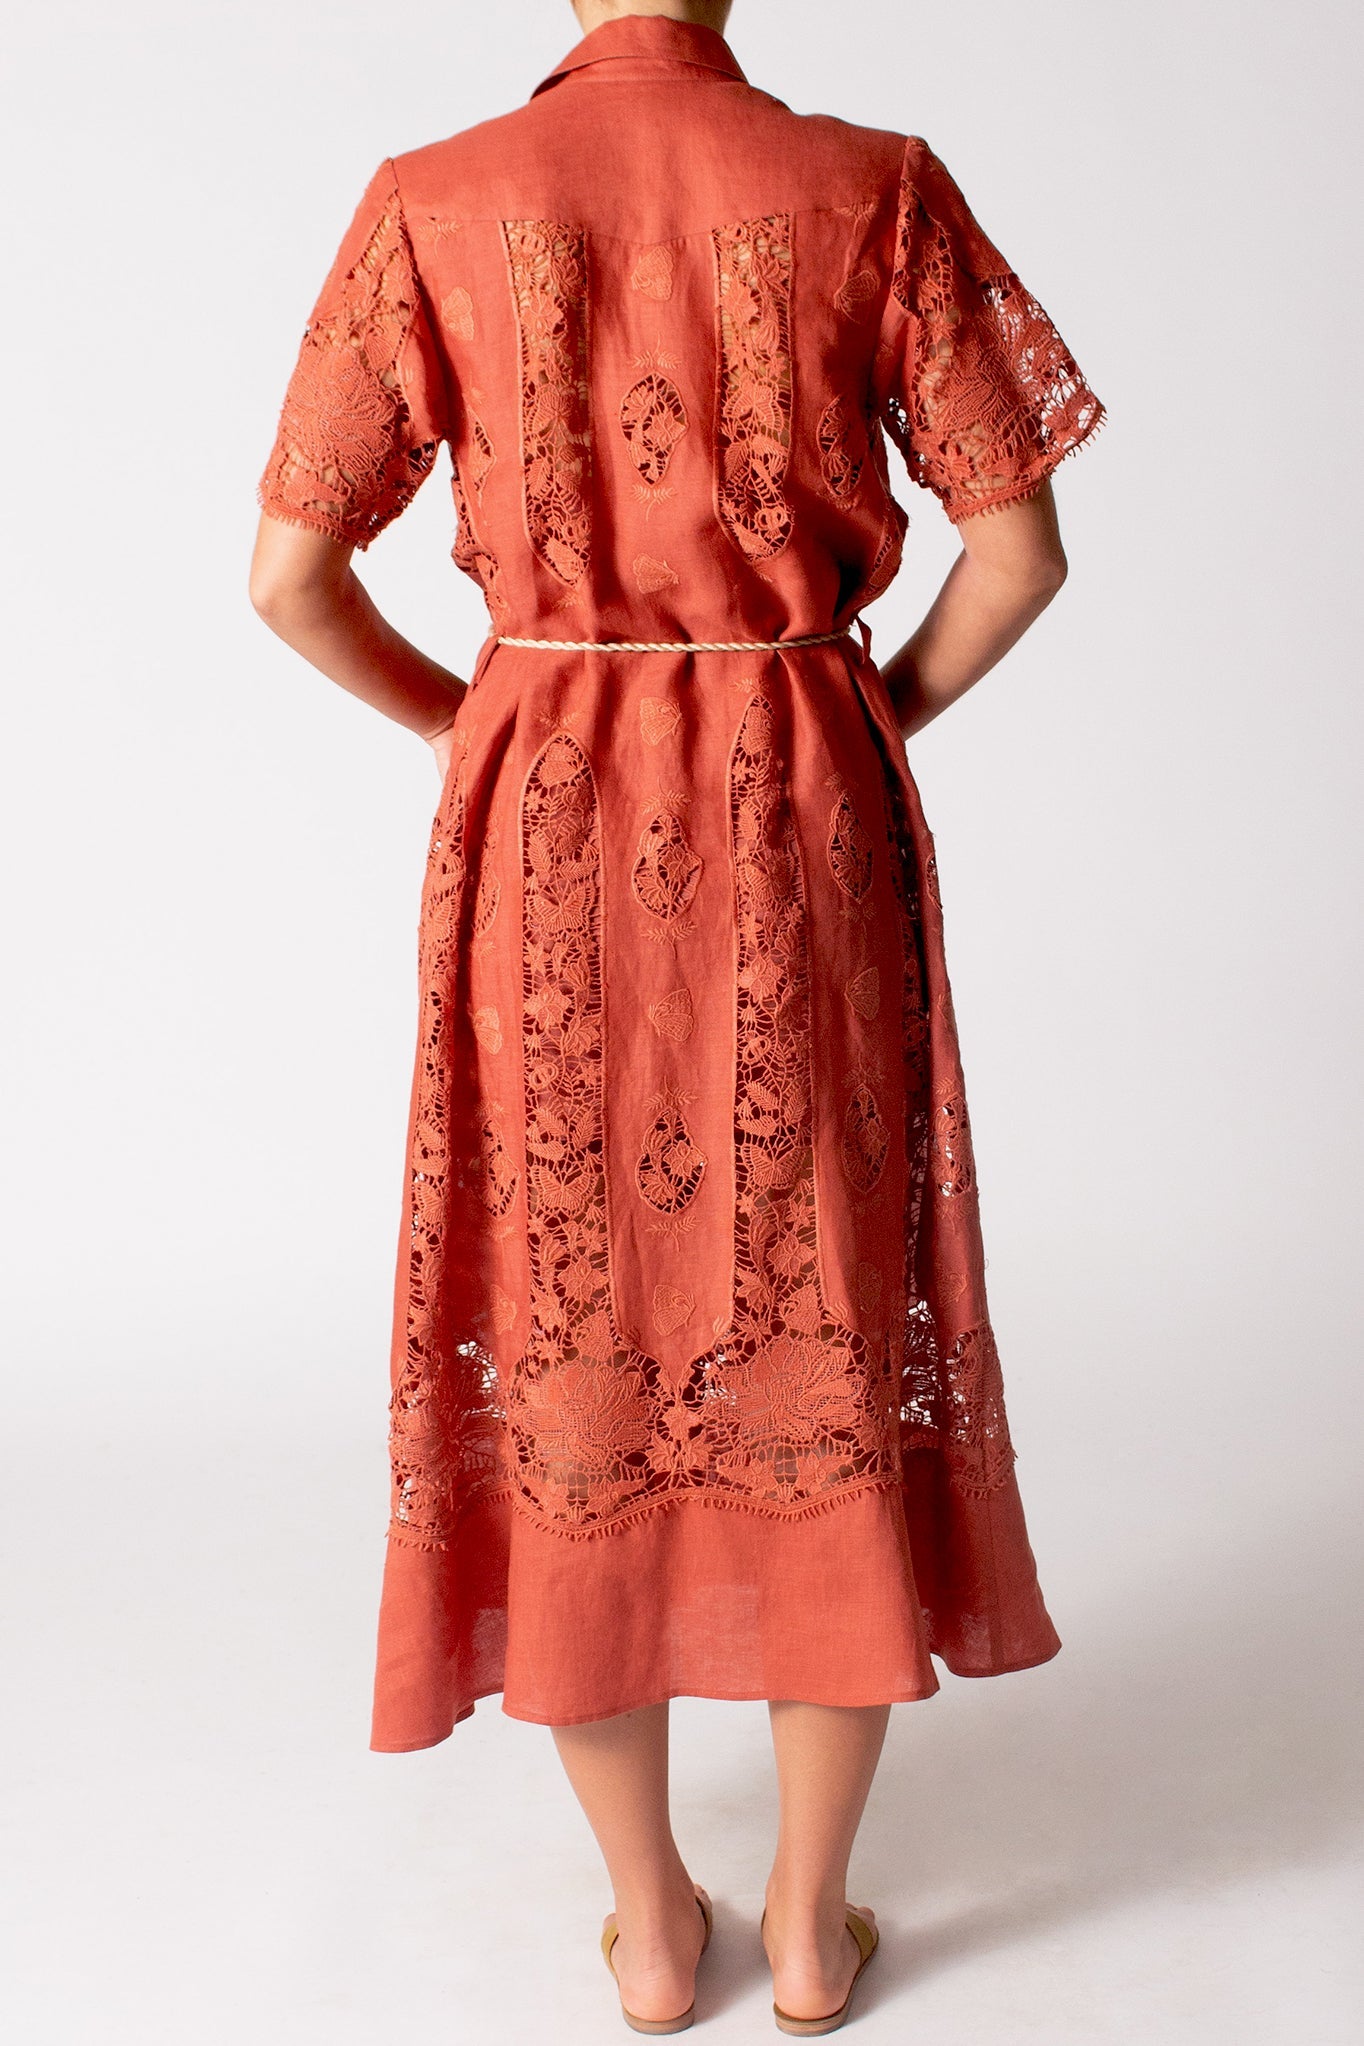 Berly Lotus Embroidery Dress - Rust